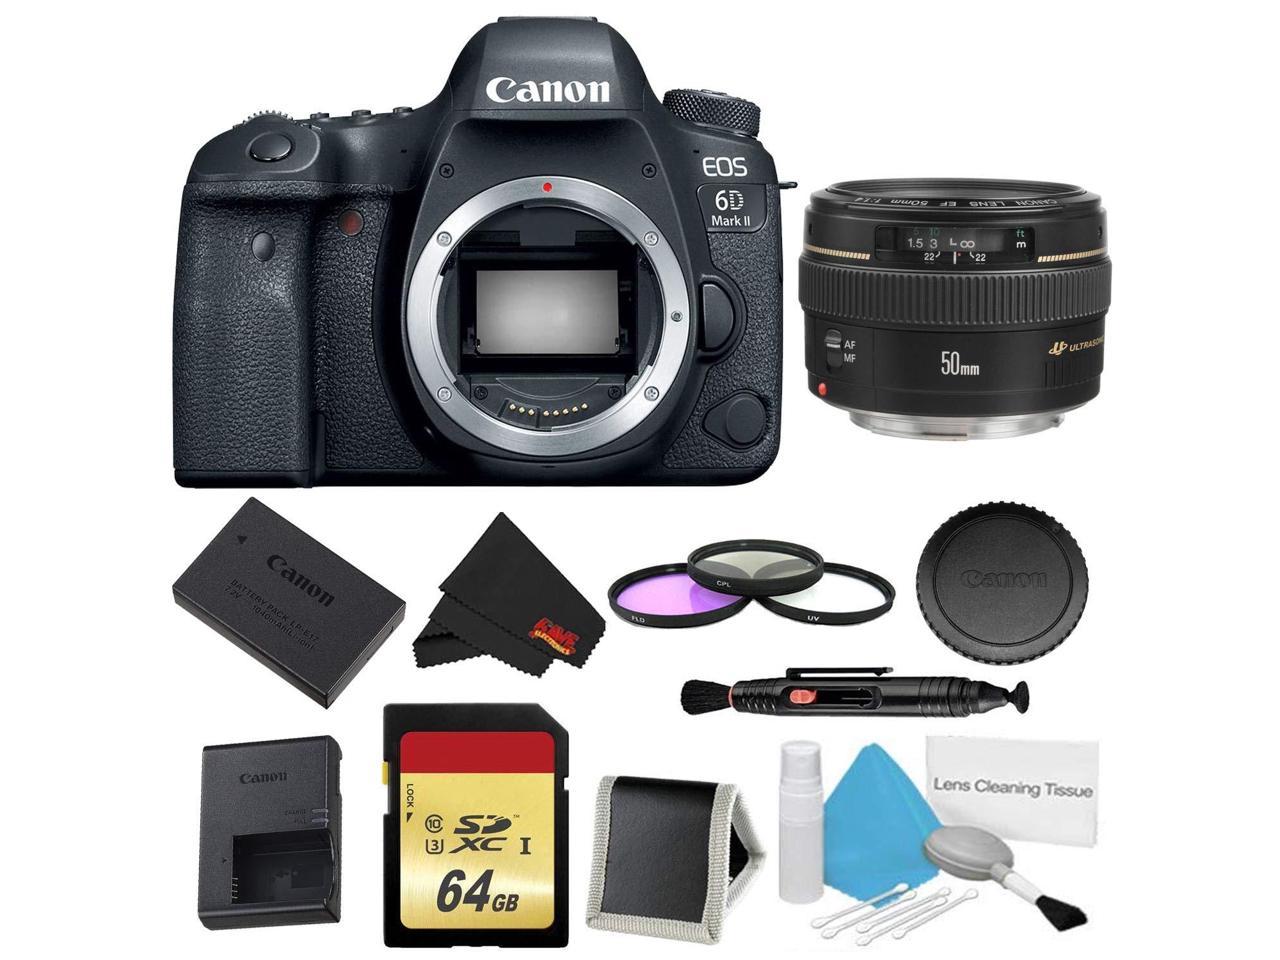 Includes 32GB SD Memory Card International Version Canon EOS 6D Mark II DSLR Camera with Canon EF 50mm f/1.4 USM Lens 16PC Accessory Bundle 2x Replacement Batteries No Warranty AC/DC Rapid Home & Travel Charger MORE 